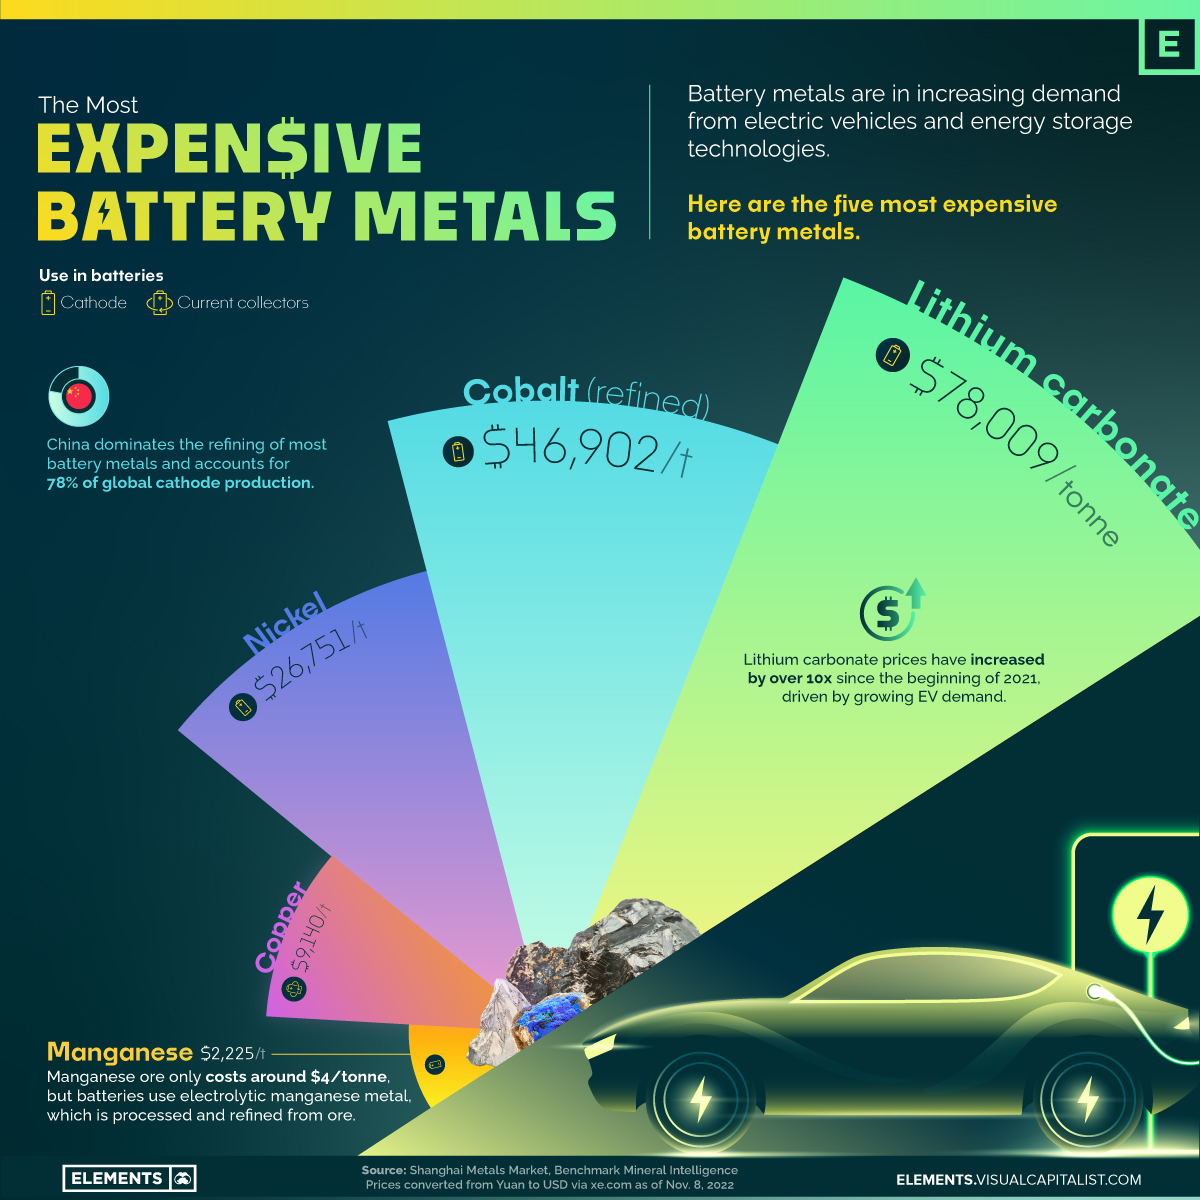 Visualizing the Most Expensive Battery Metals